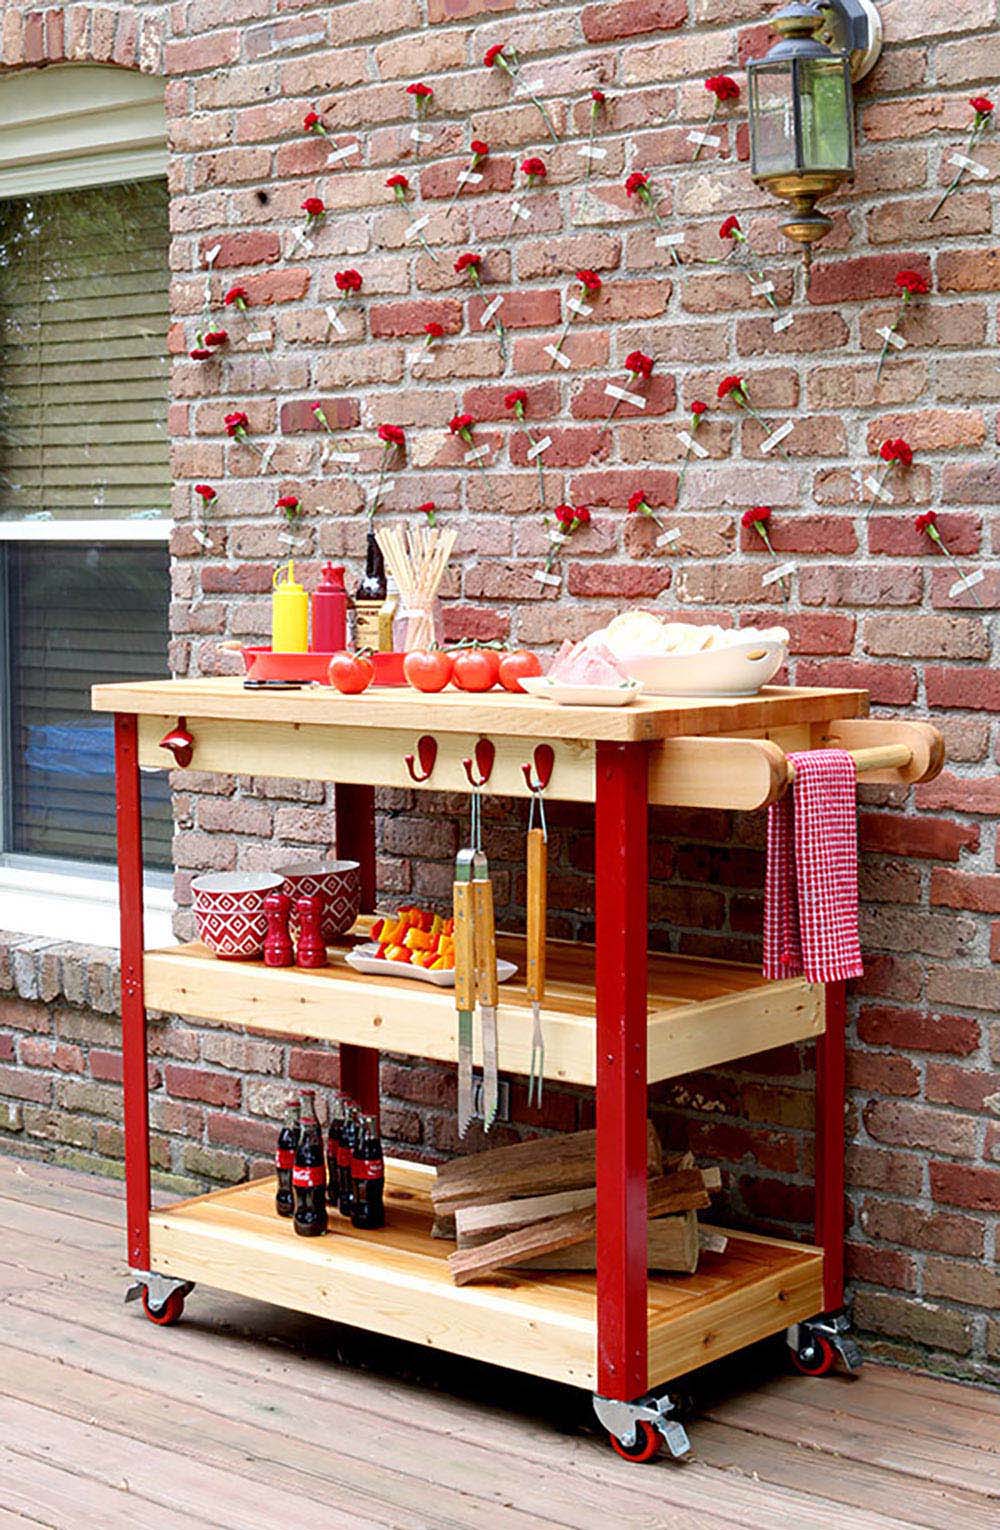 A DIY grill cart with red accents made from metal, cedar, and butcher block.